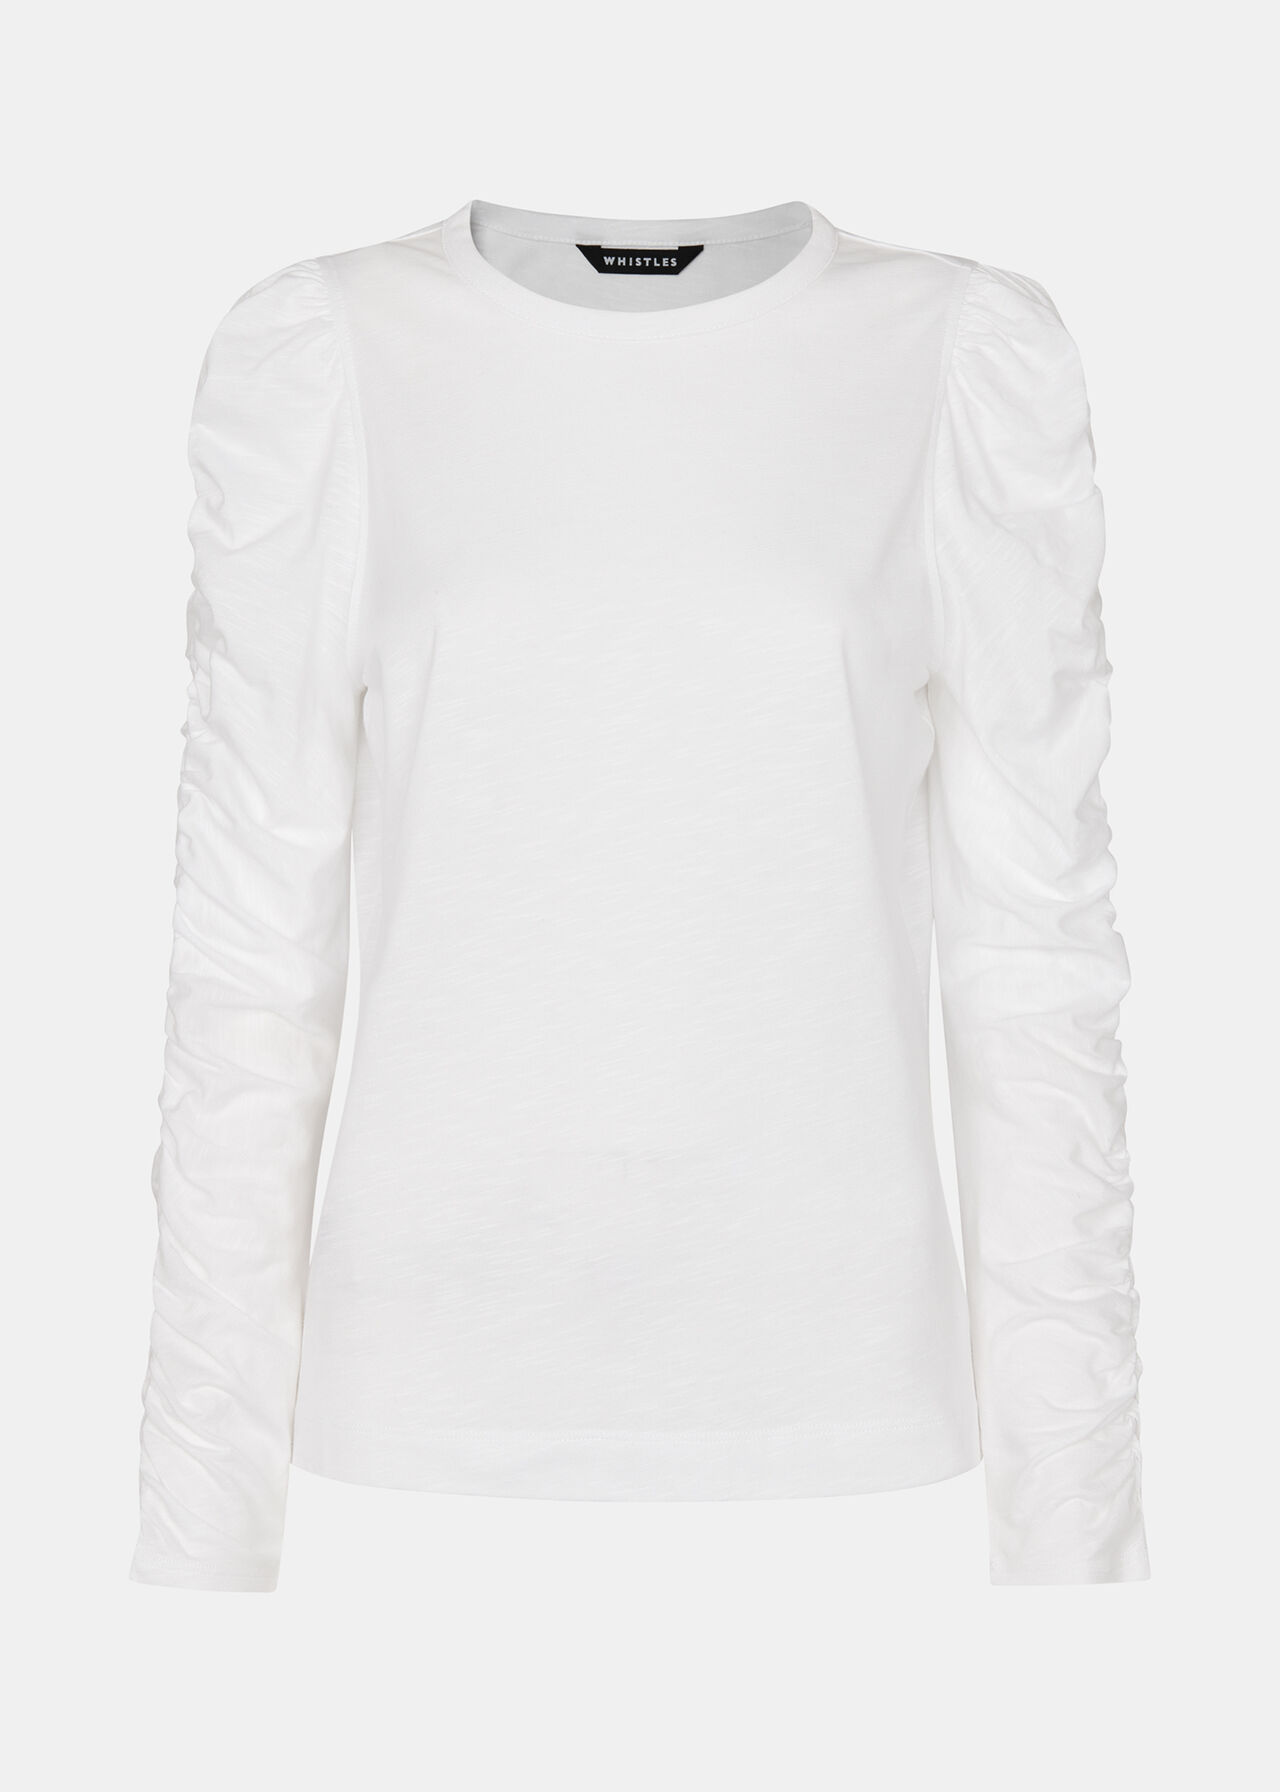 White Ruched Sleeve Top | WHISTLES